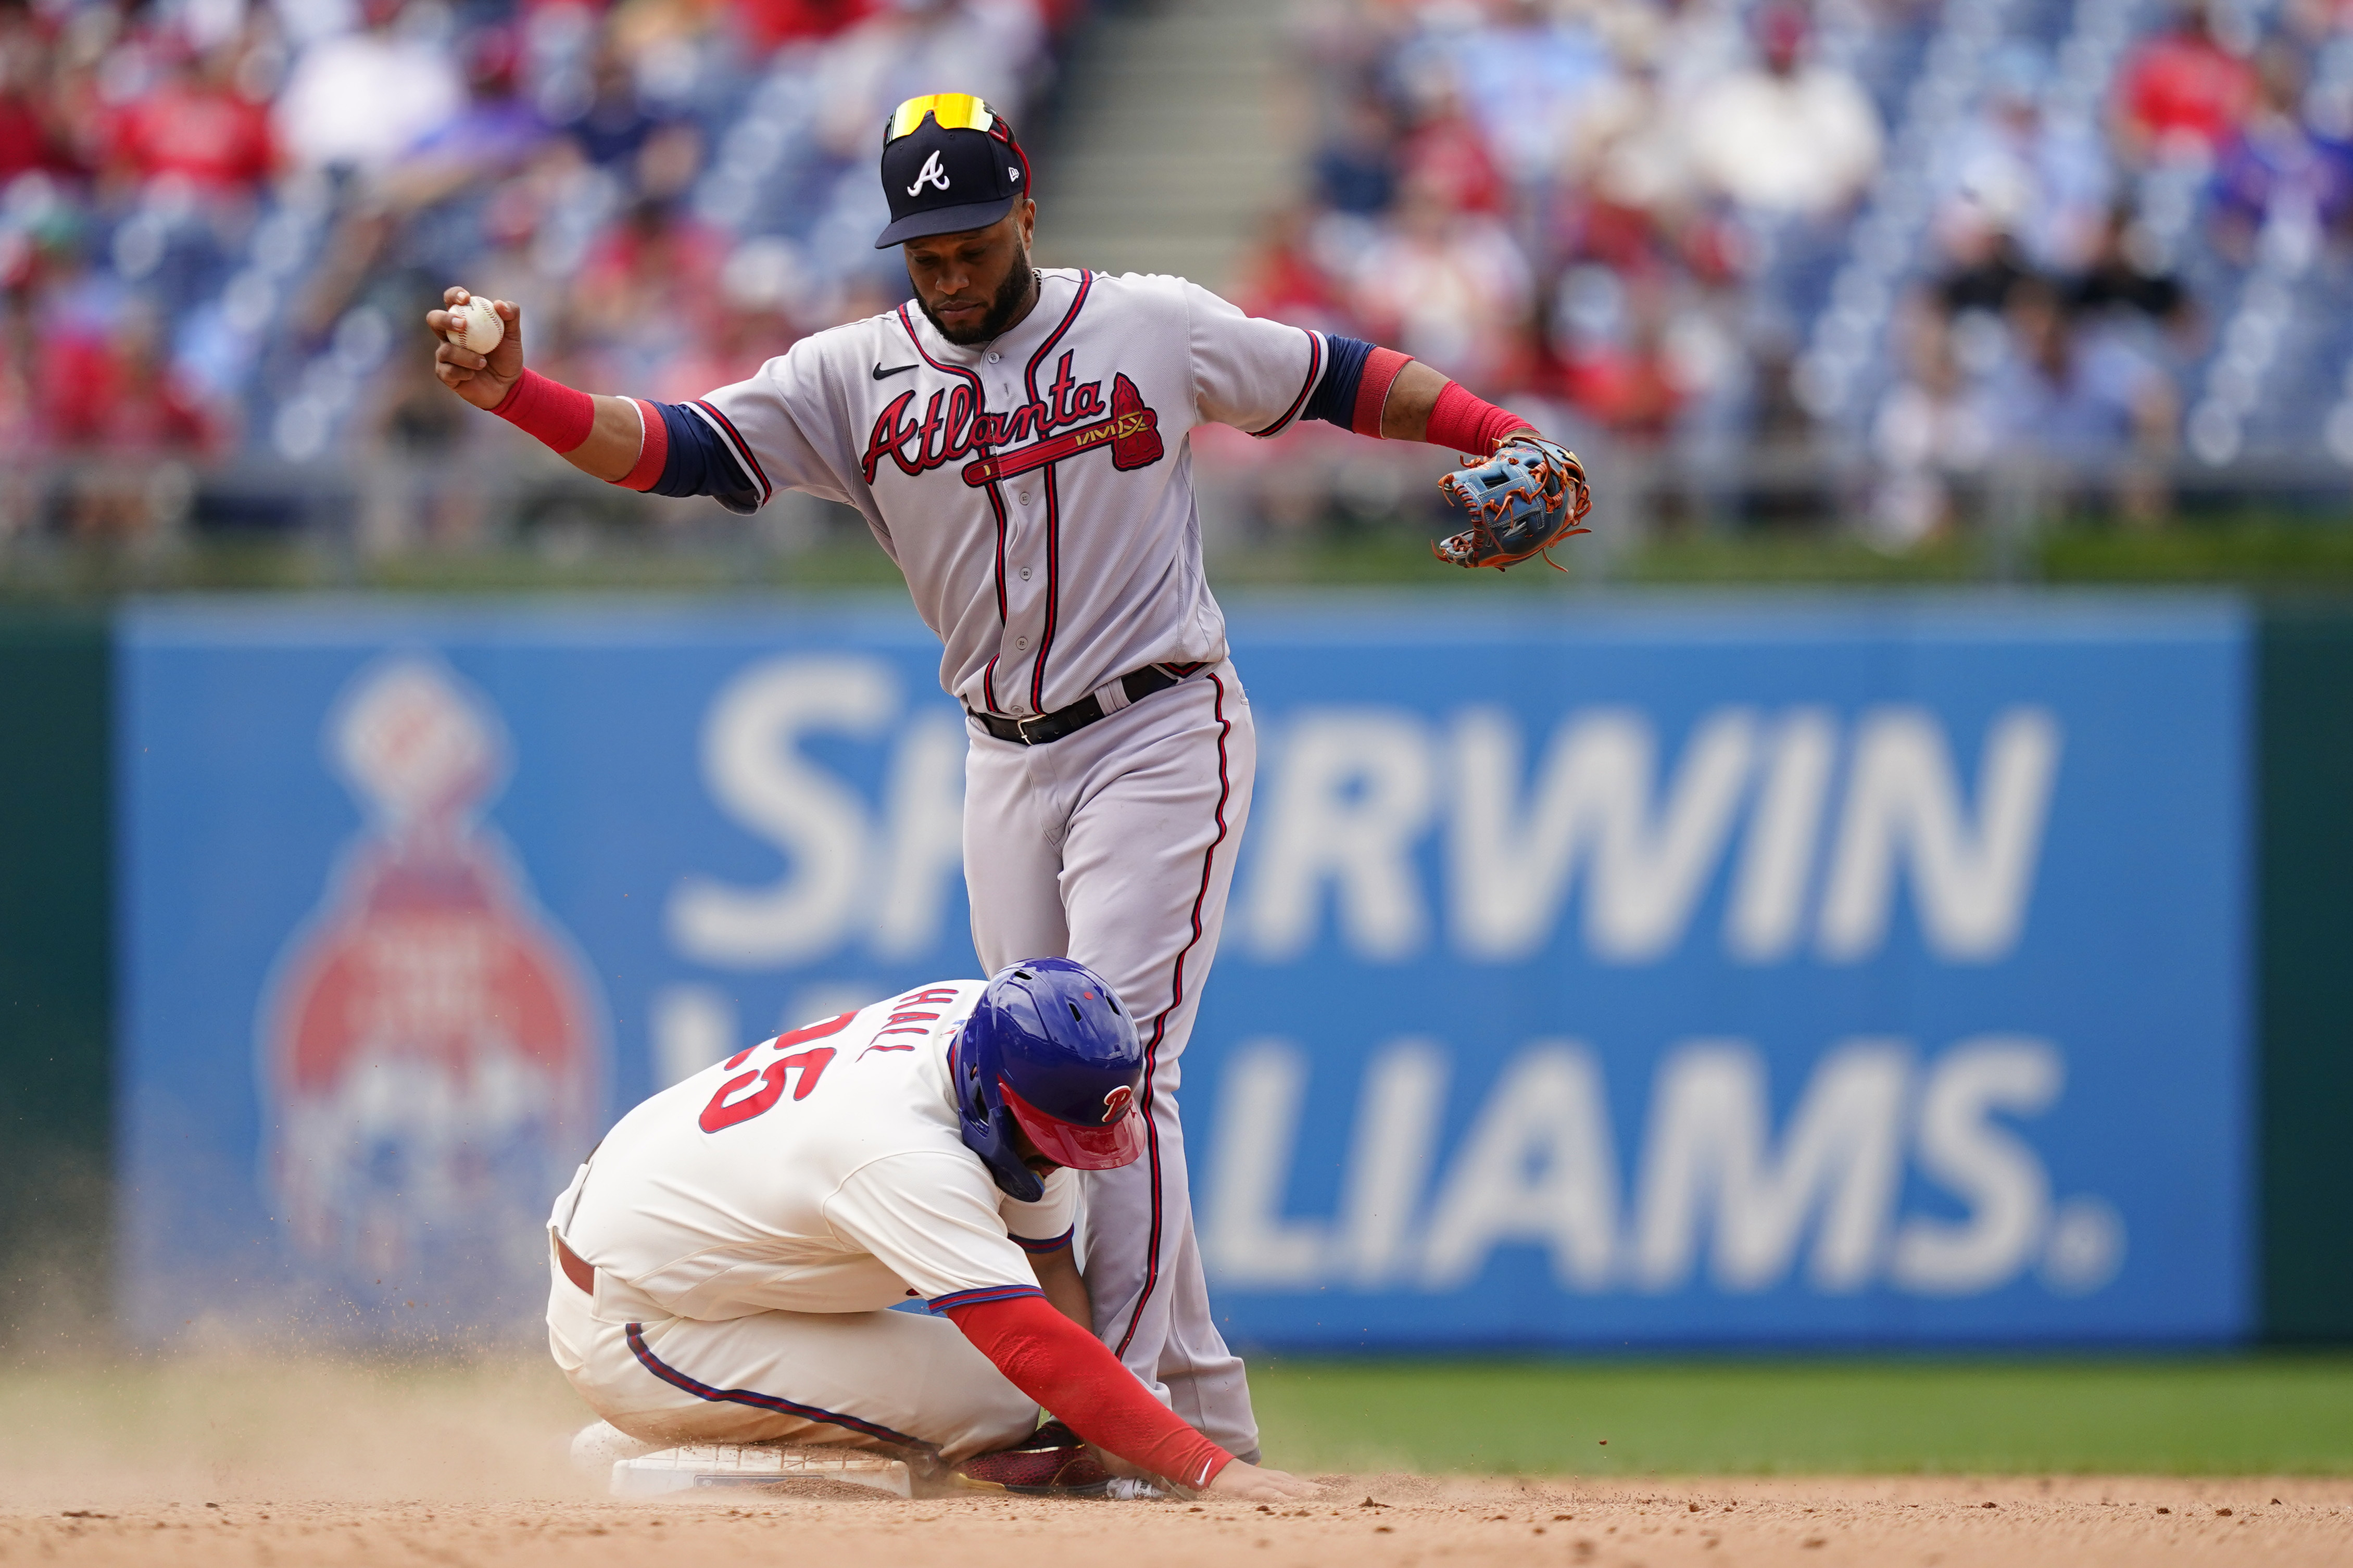 Bohm helps Phils beat Braves 7-2, take 2 of 3 from Atlanta